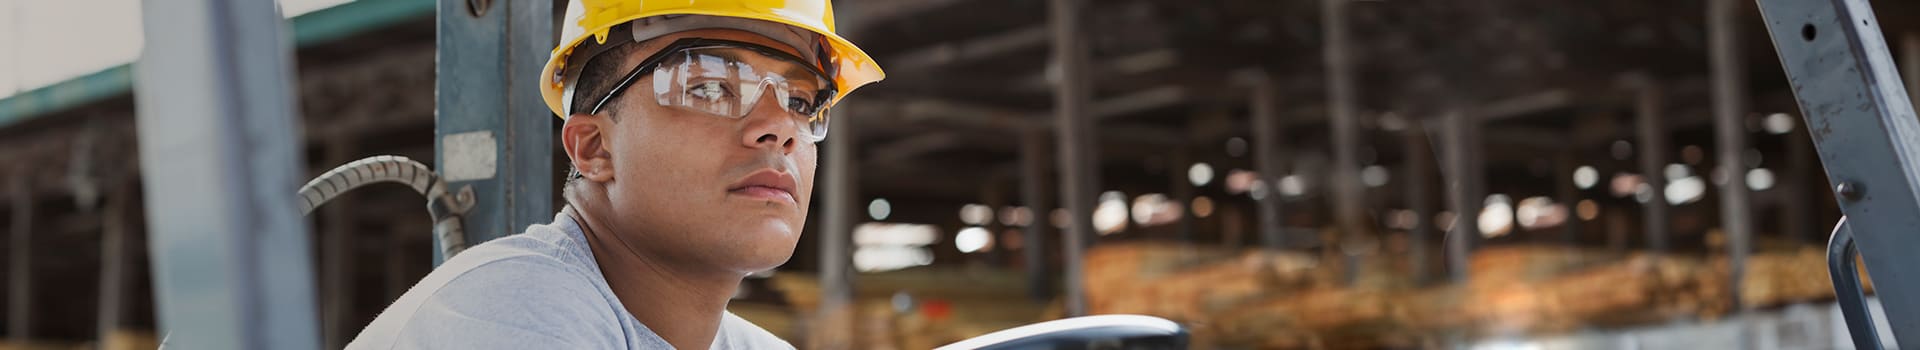 Occupational Health: Person wearing a hardhat and safety glasses